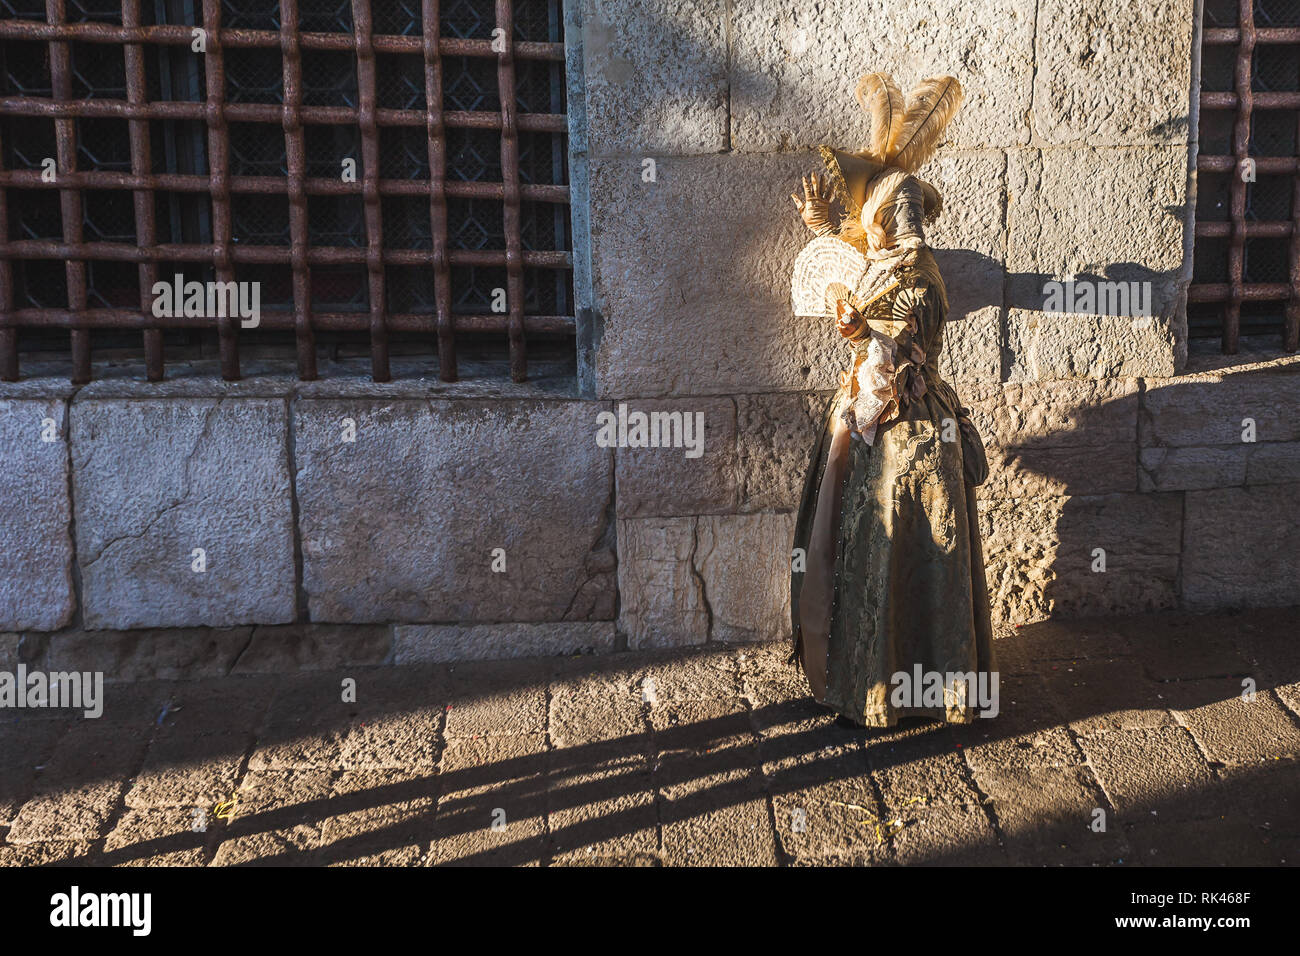 VENICE, ITALY - FEBRUARY 10 2018: Carnival mask dressed in gold, leaning against the prisons wall Stock Photo